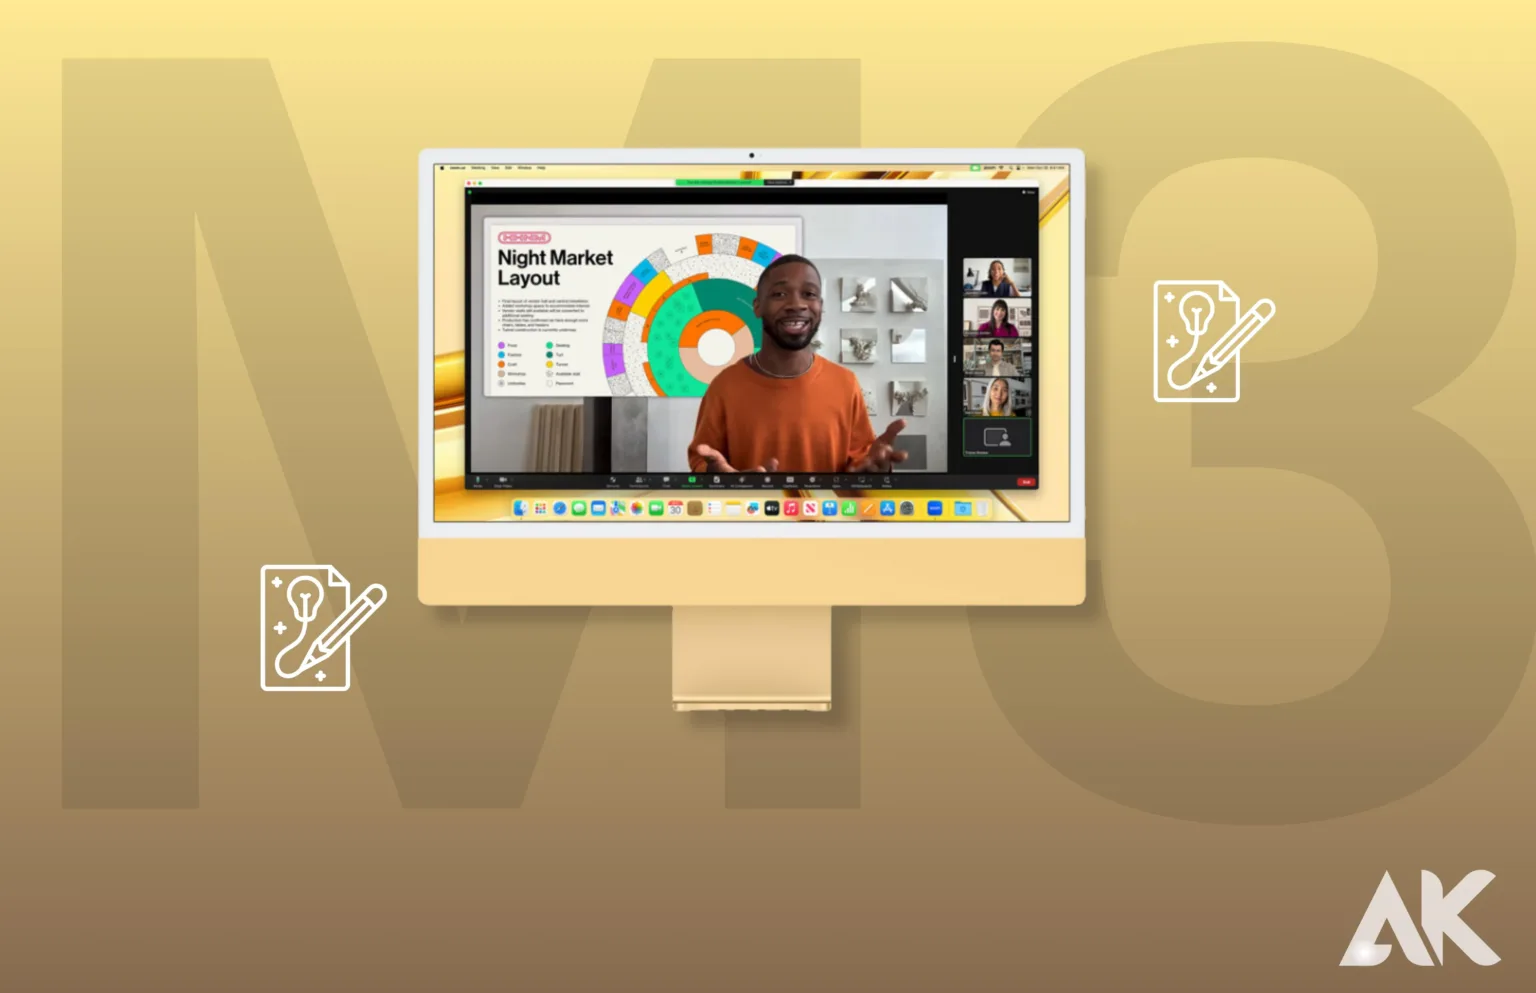 M3 iMac for Students: The Best All-in-One Desktop for Learning, Creating, and More